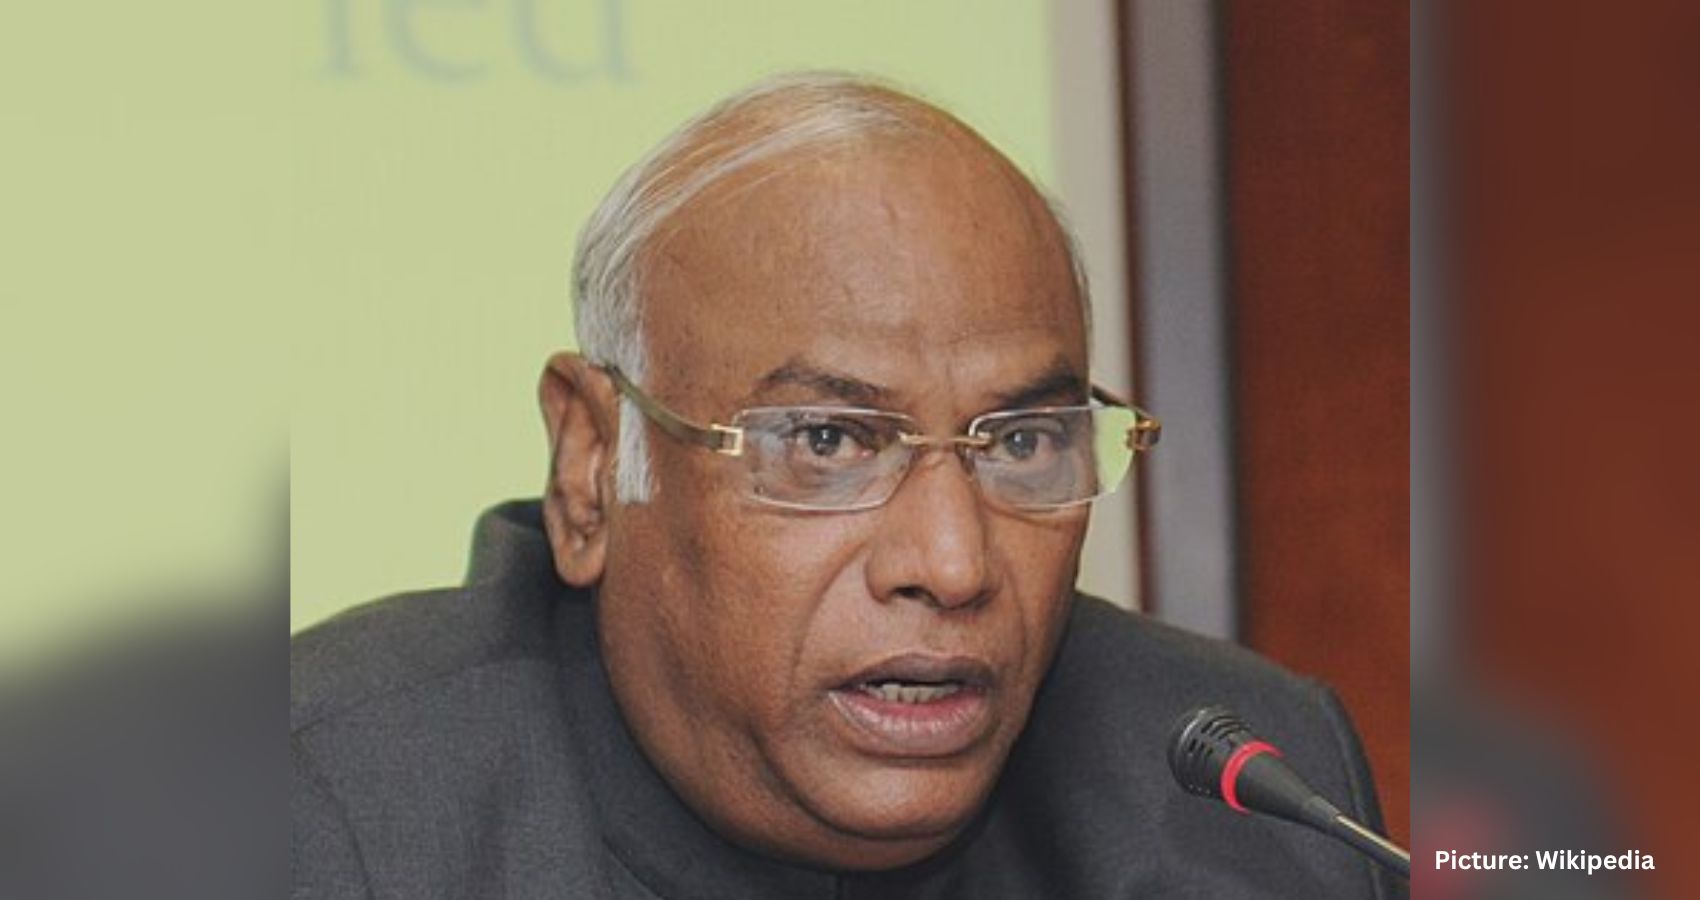 Featured & Cover Kharge INDIA Bloc Open to New Allies After Decisive Mandate Against Modi